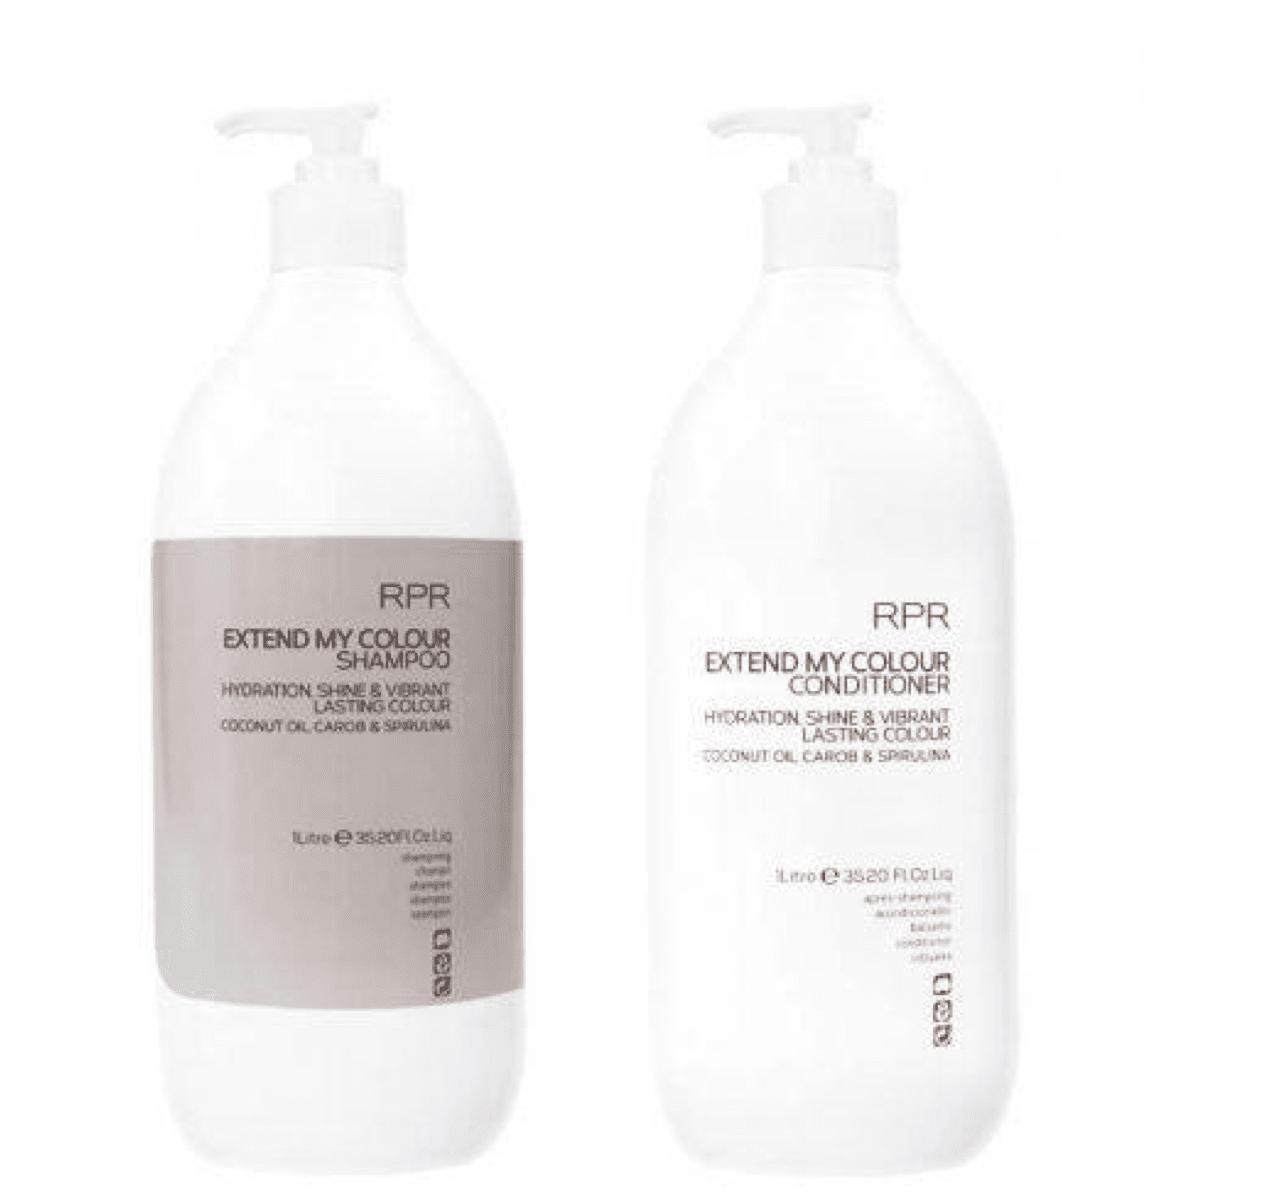 RPR Extend My Colour Shampoo and Conditioner 1000ml Duo